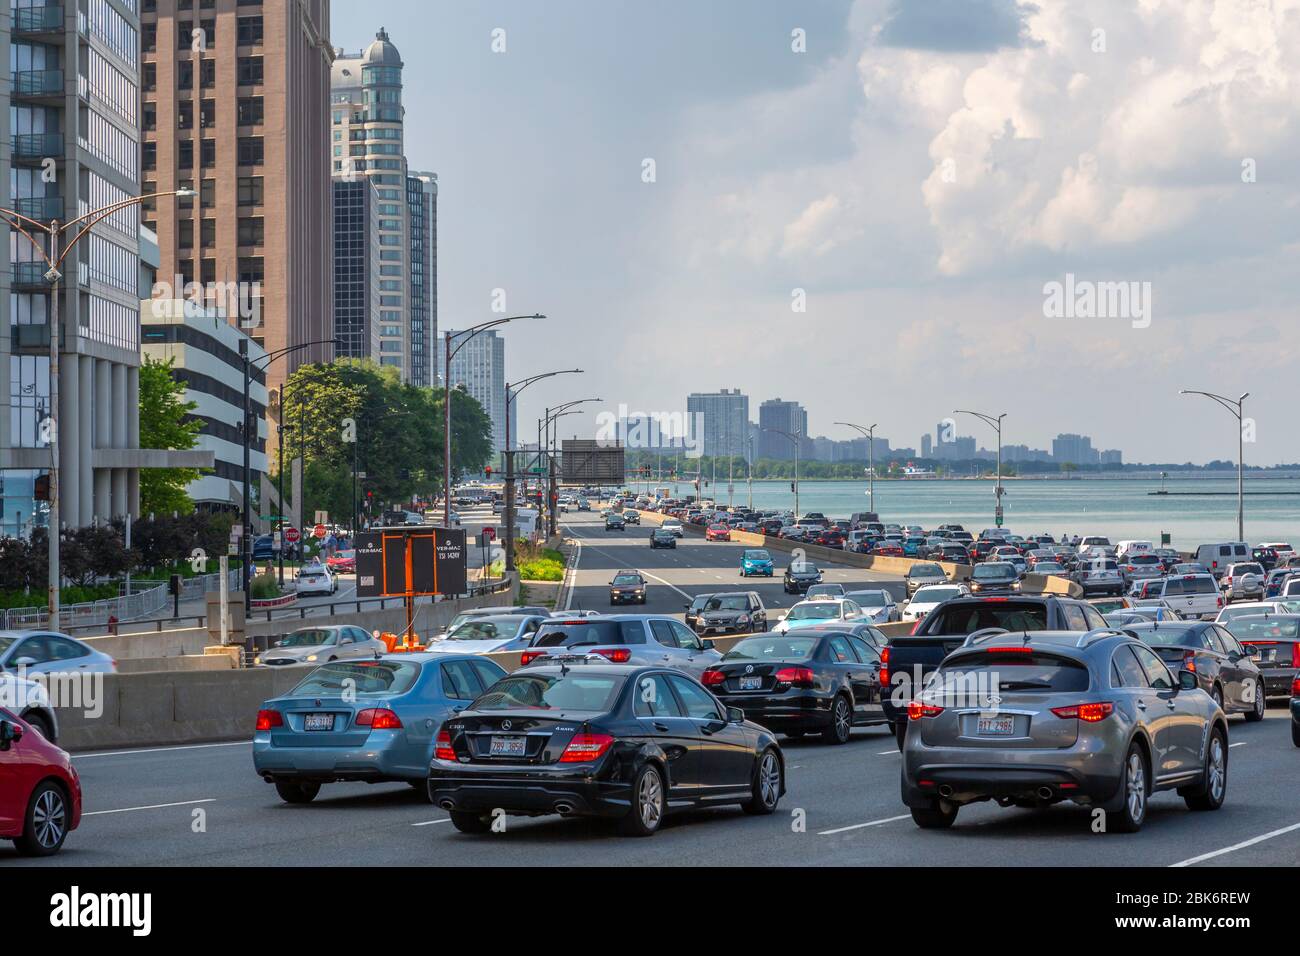 View of traffic accumulation on North Lake Shore Drive, Chicago, Illinois, United States of America, North America Stock Photo